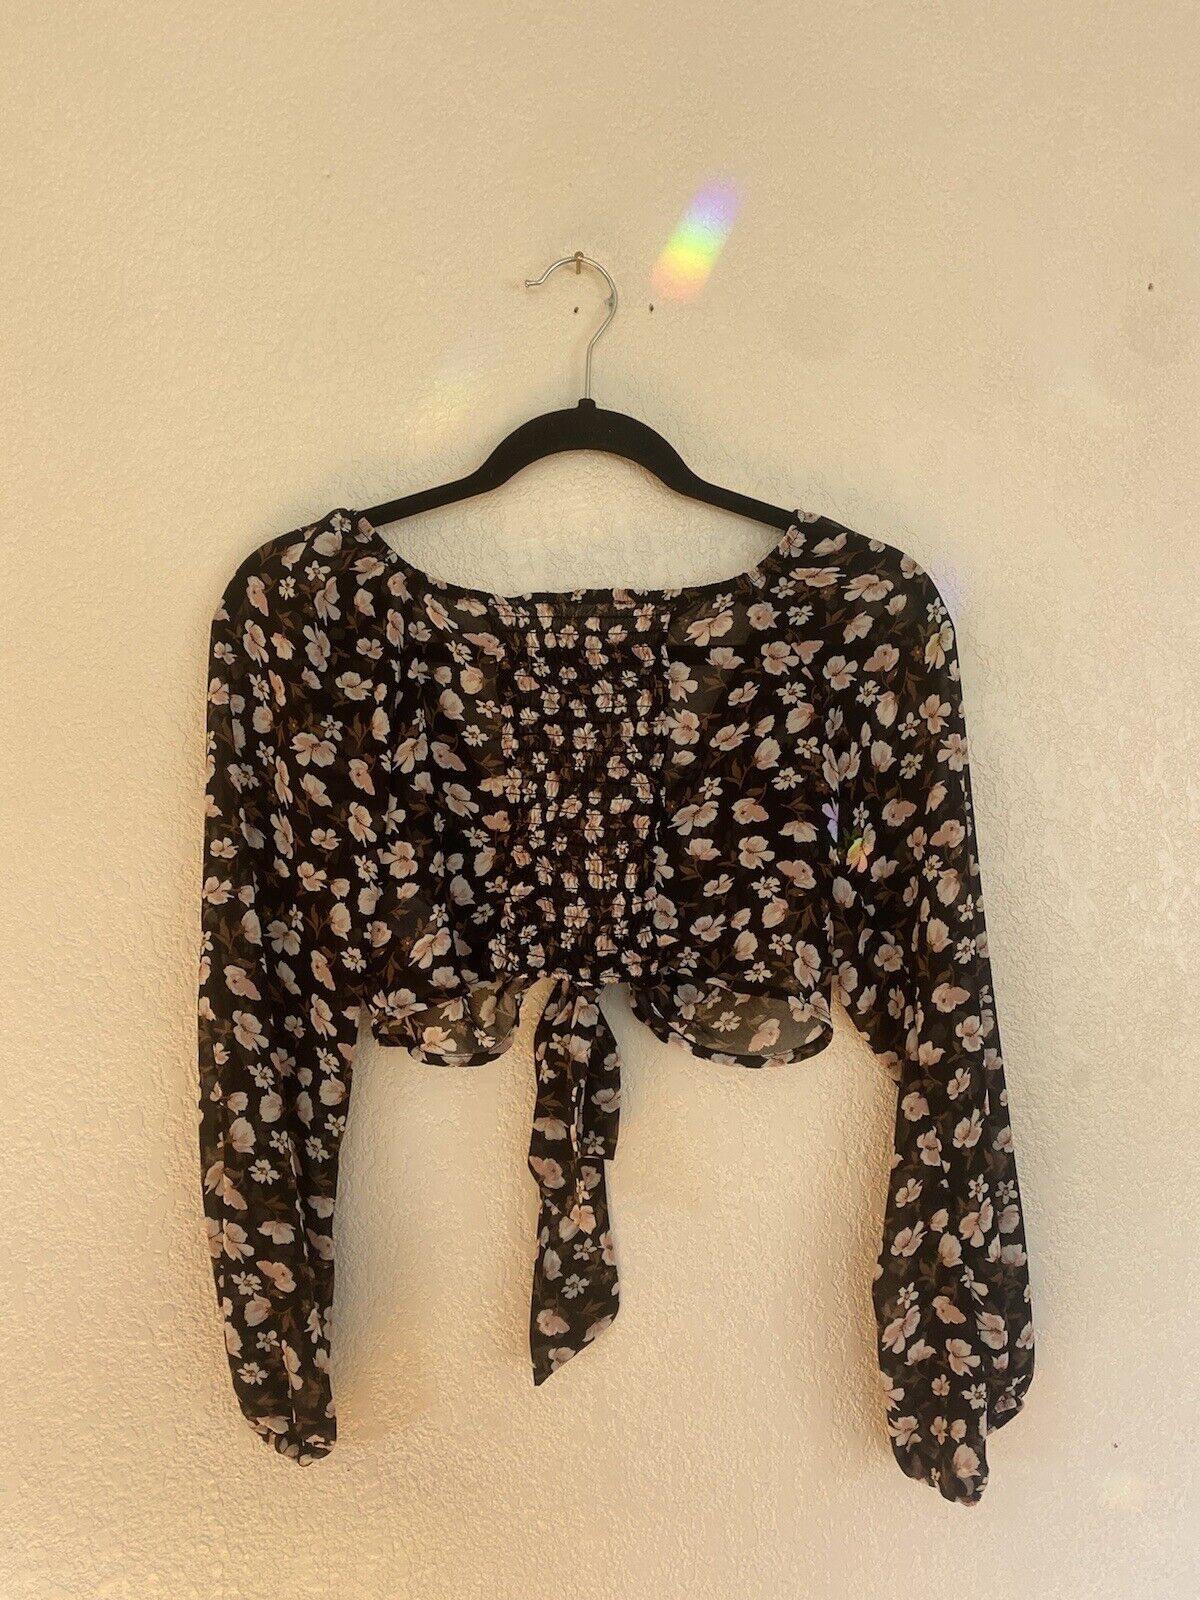 Brown Floral Tie-Front Top - Unbranded - Women's Small # 2185